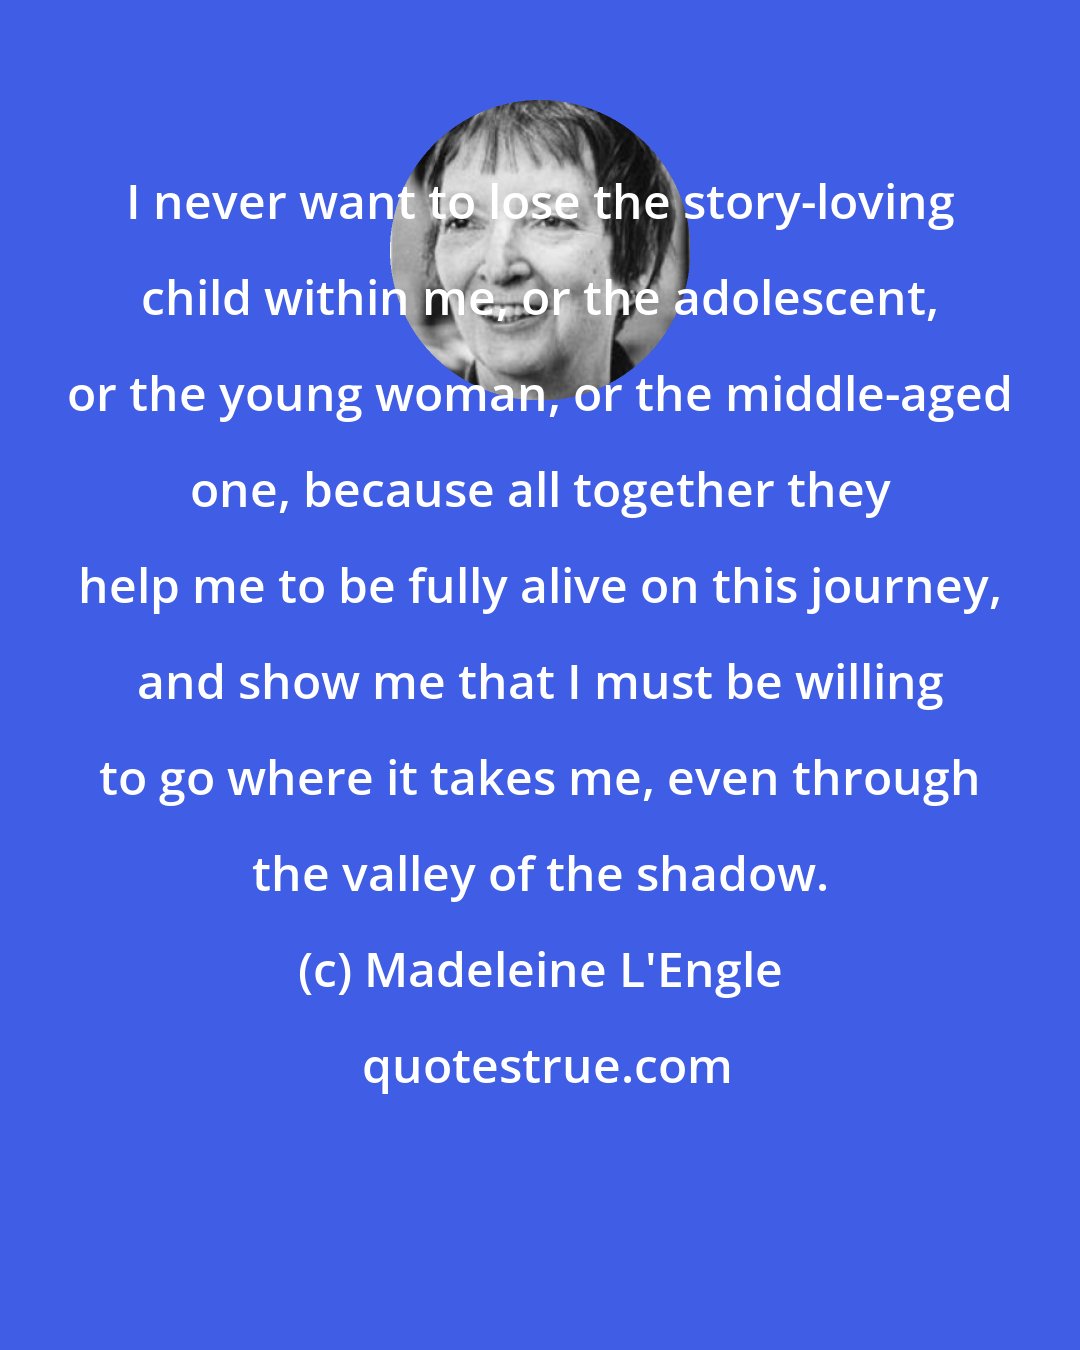 Madeleine L'Engle: I never want to lose the story-loving child within me, or the adolescent, or the young woman, or the middle-aged one, because all together they help me to be fully alive on this journey, and show me that I must be willing to go where it takes me, even through the valley of the shadow.